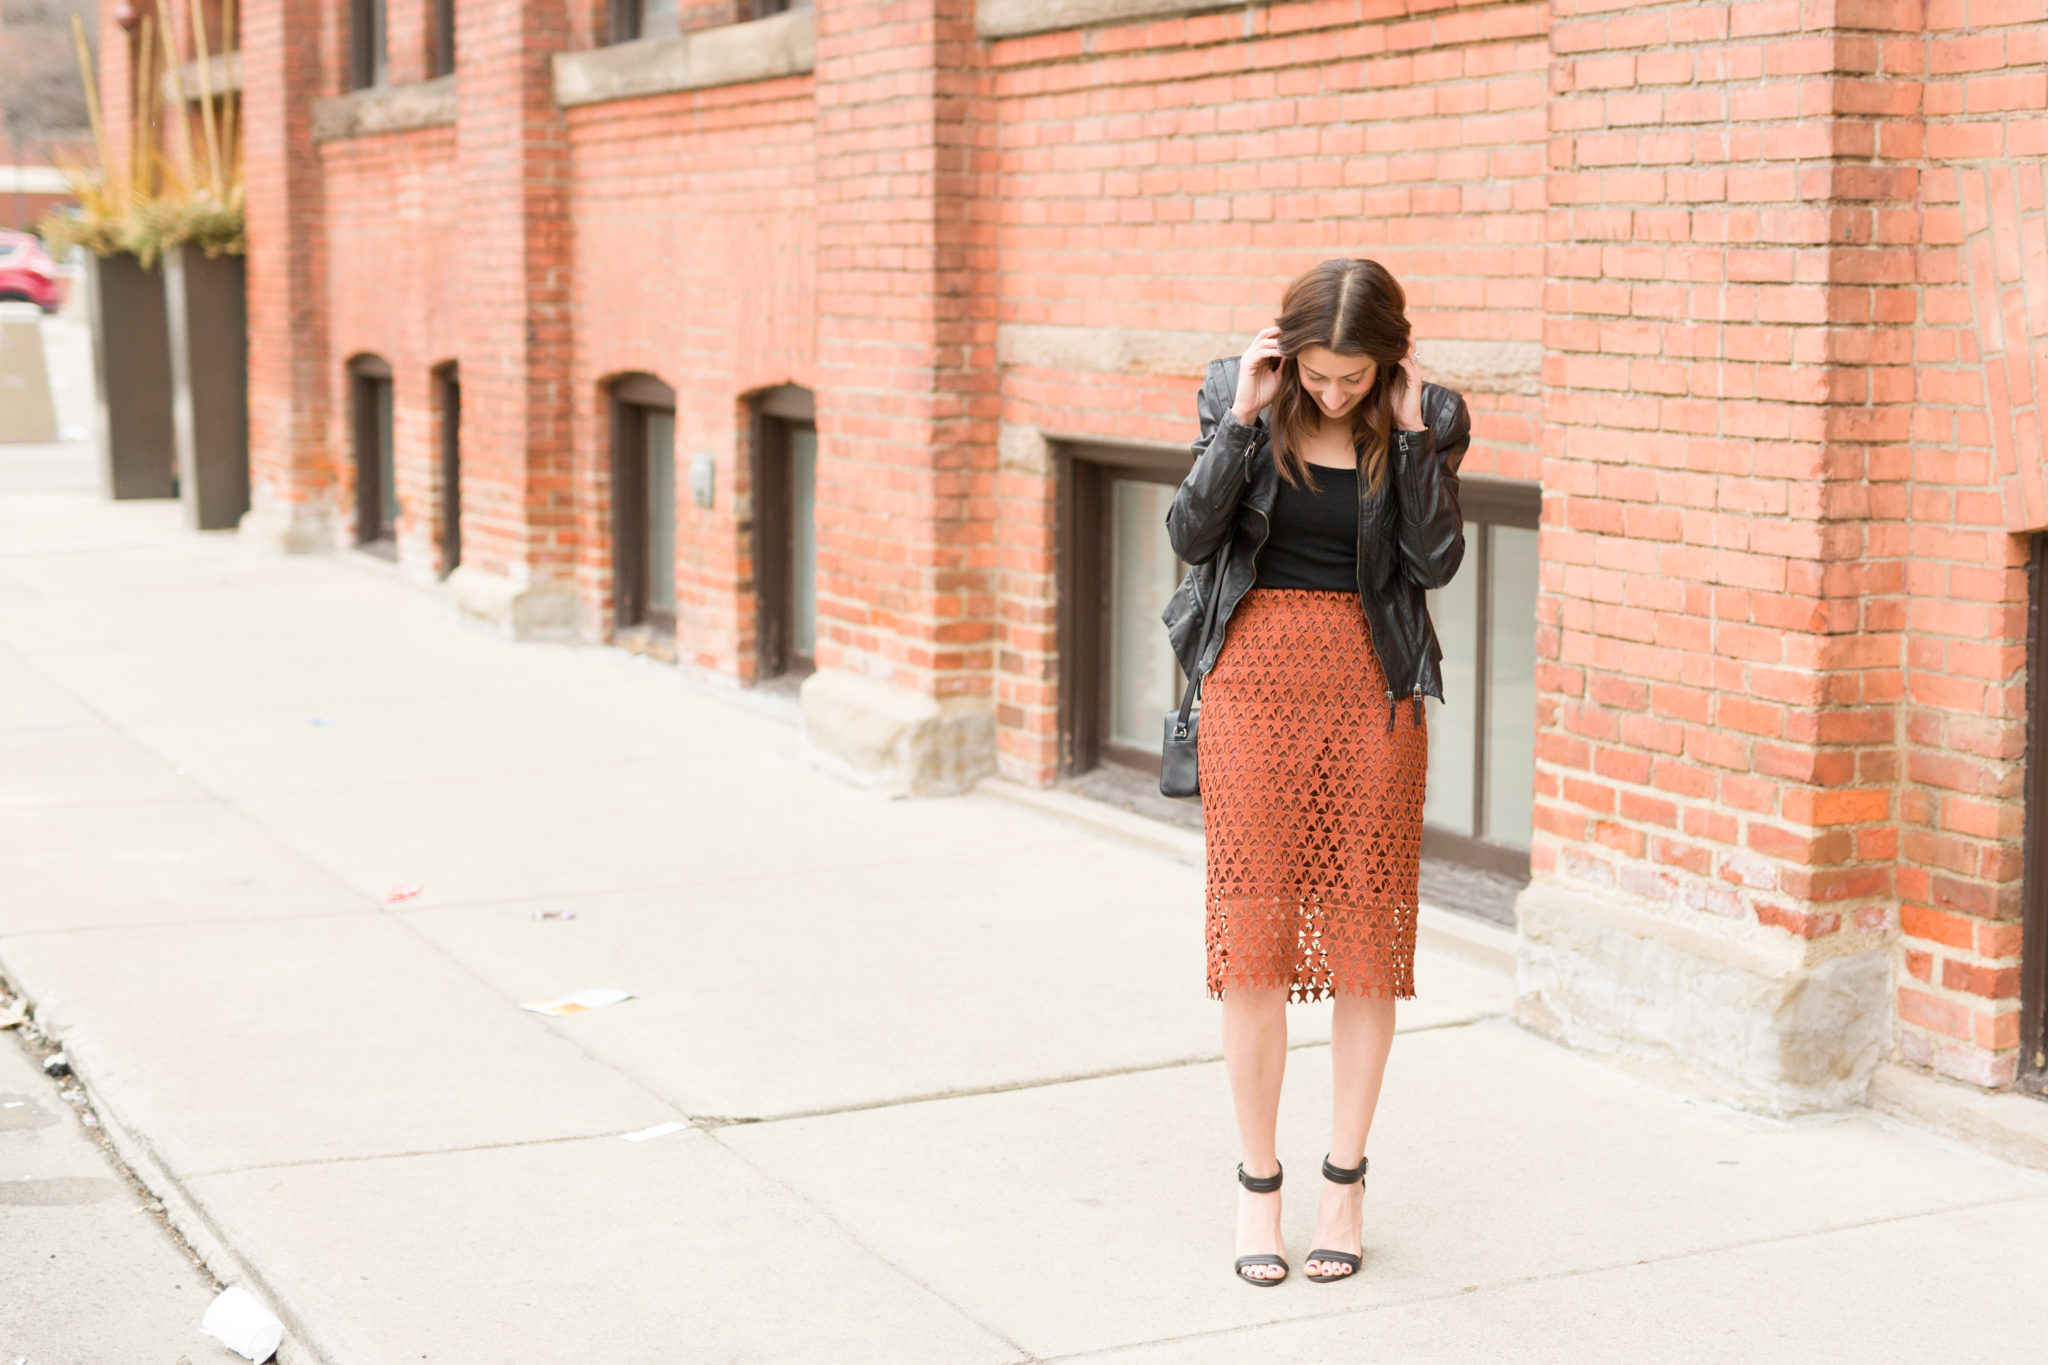 an edgy date night look | Chicwish Twinkle Star Crochet Pencil Skirt in Tan | How to style a pencil skirt for date night | chic date night looks for moms on allweareblog.com